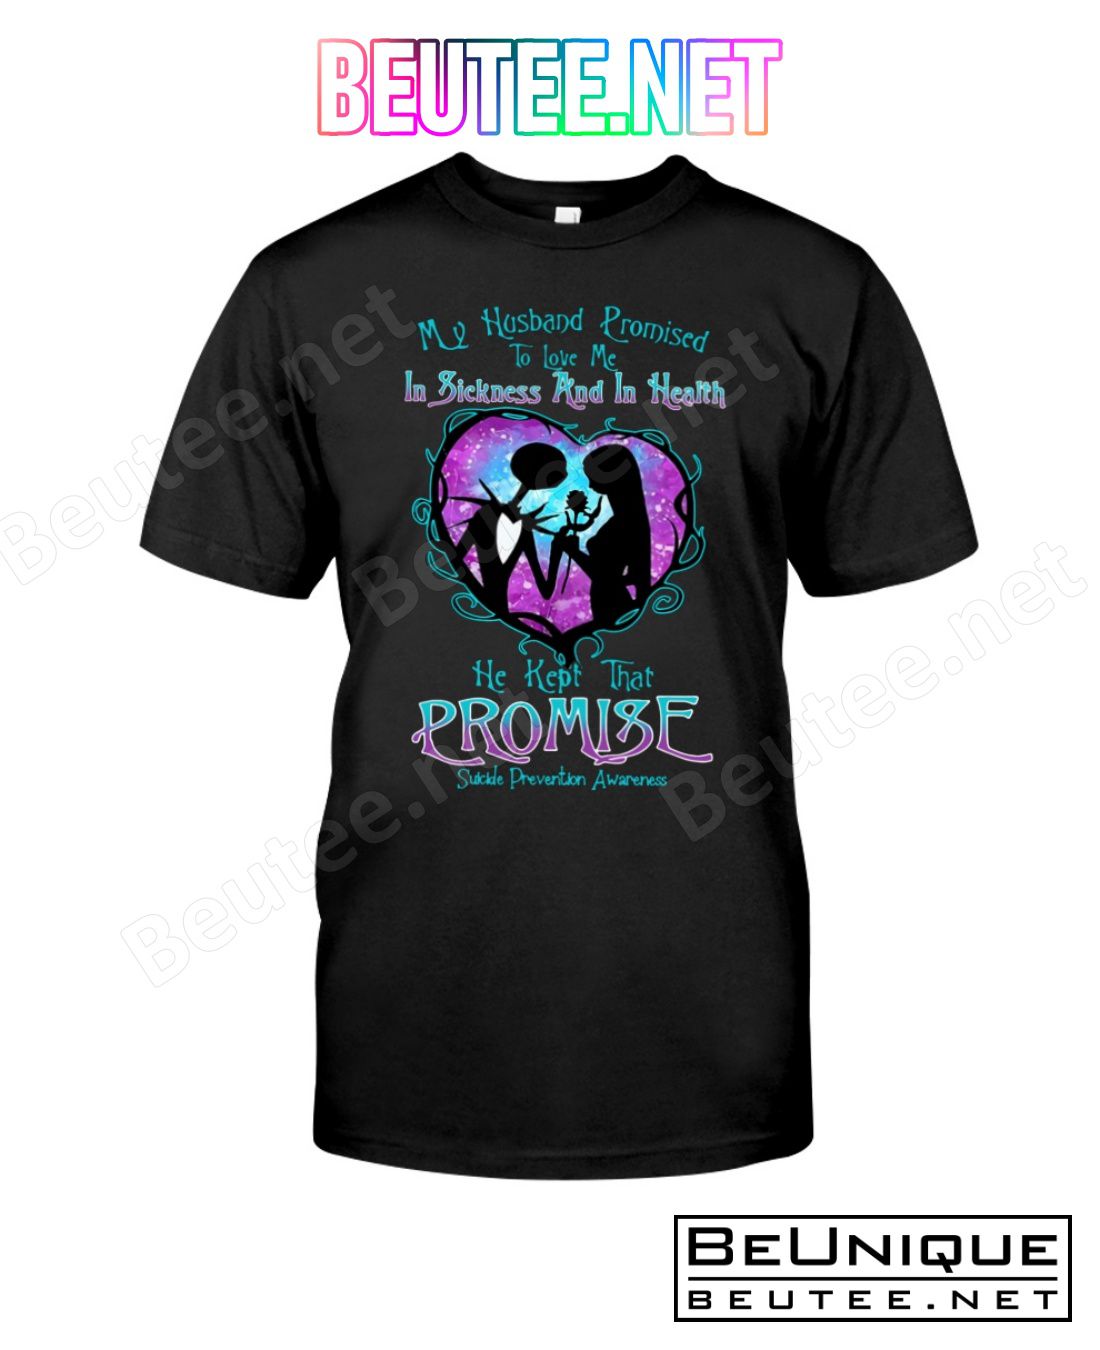 Jack And Sally My Husband Promised To Love Me In Sickness And In Health He Kept That Promise Suicide Prevention Awareness Shirt